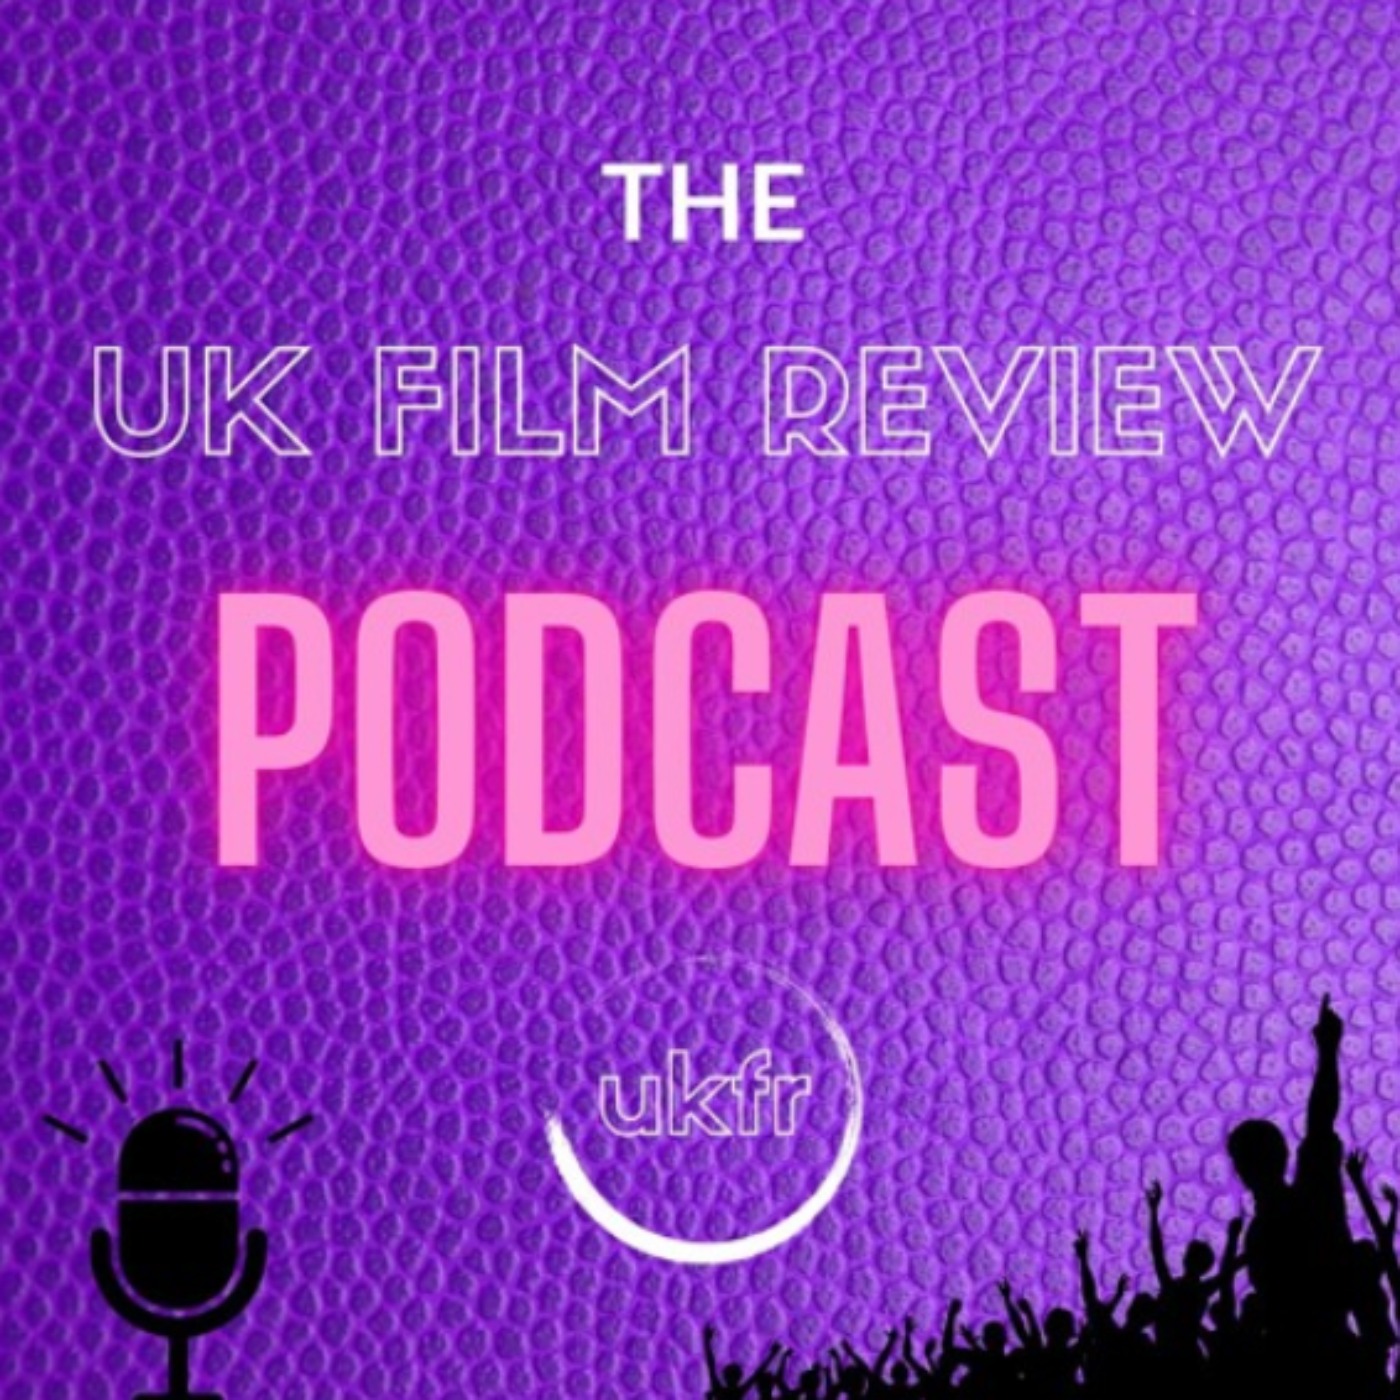 UK Film Review Podcast